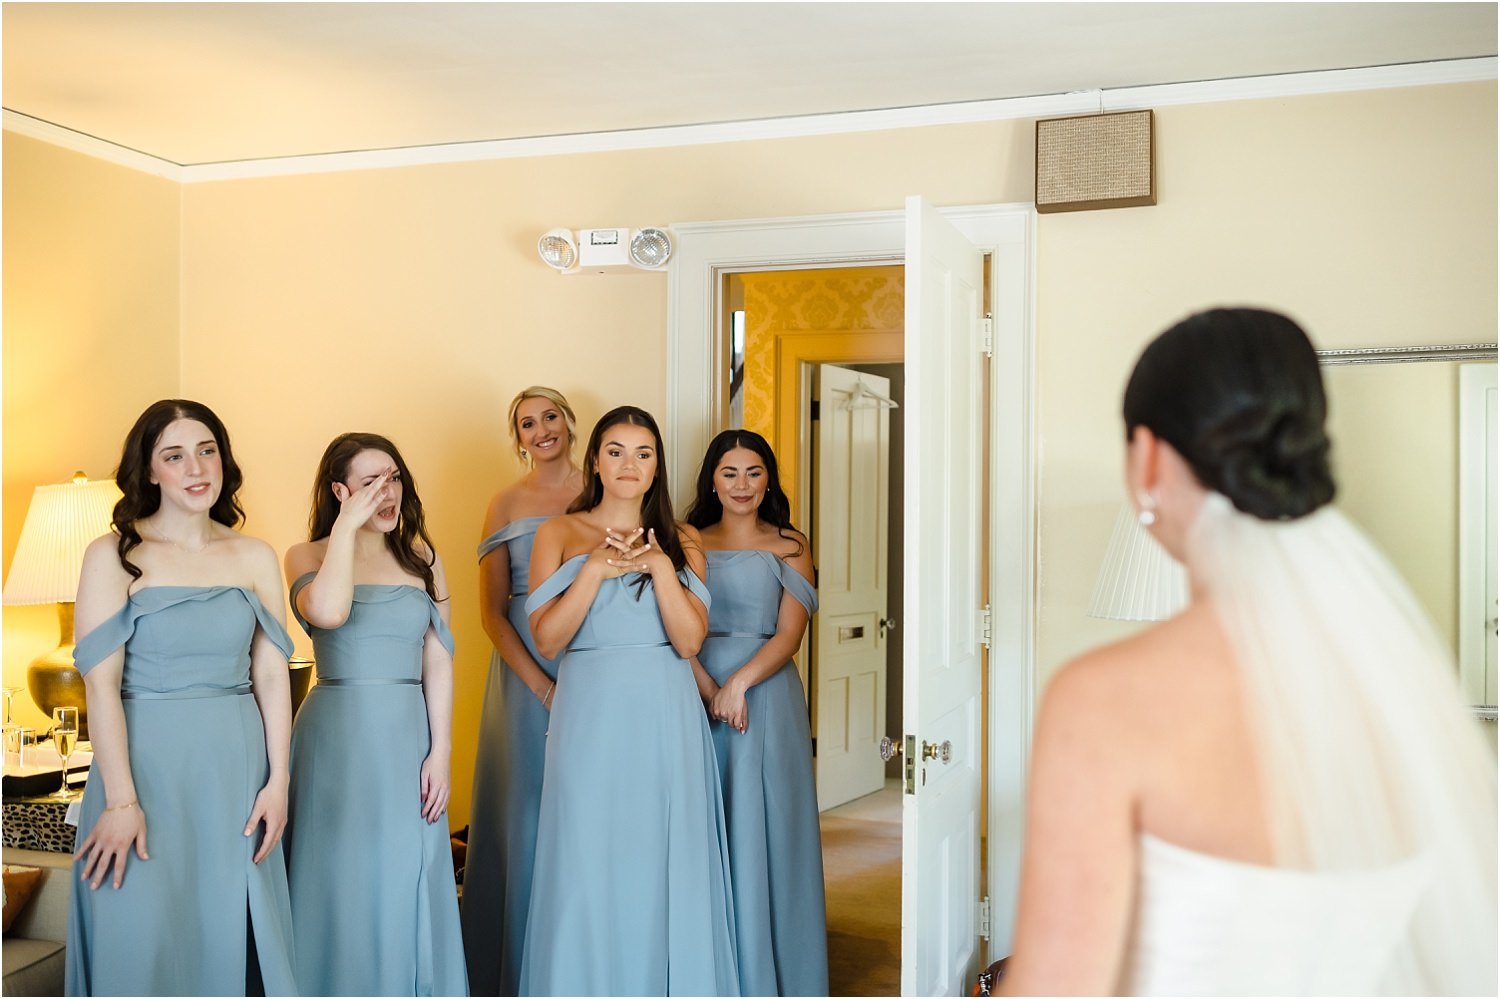  Bridesmaids wearing blue dresses happily react to the bride.  